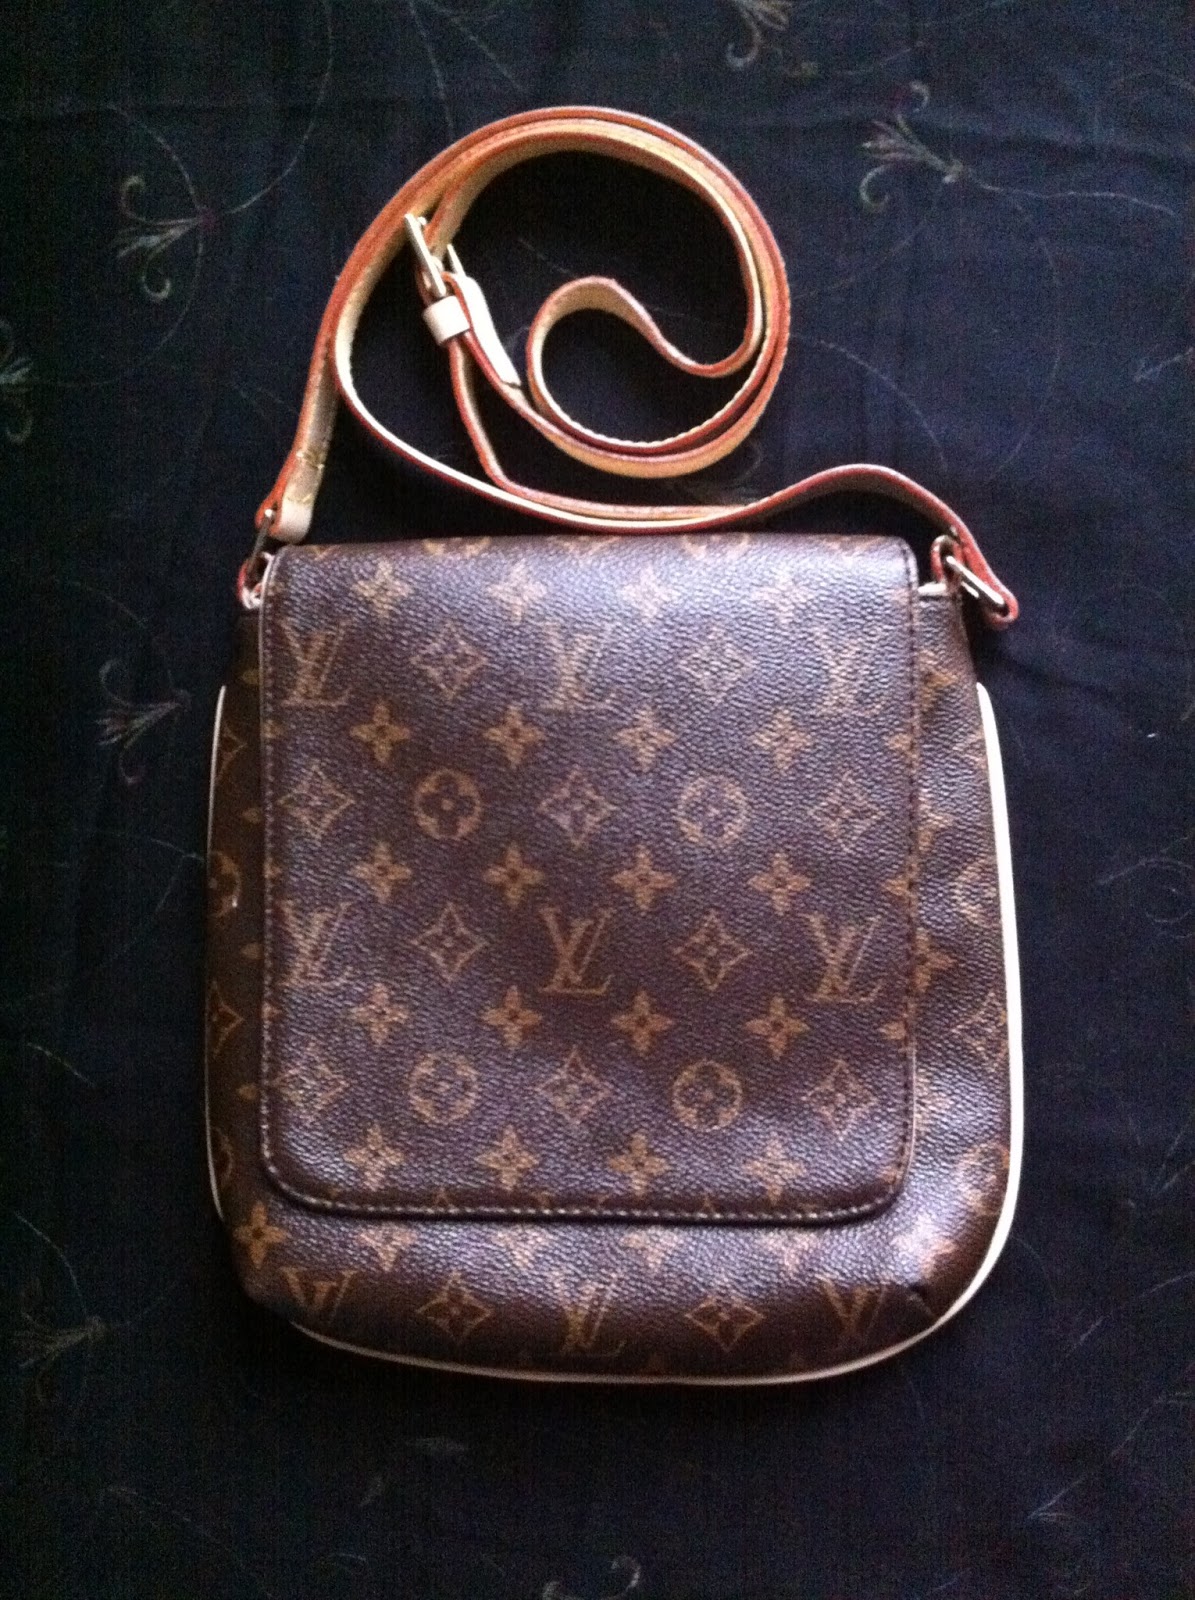 AZIM WIGAN (UK) PRE LOVED: VERY RARE LOUIS VUITTON BAG made in